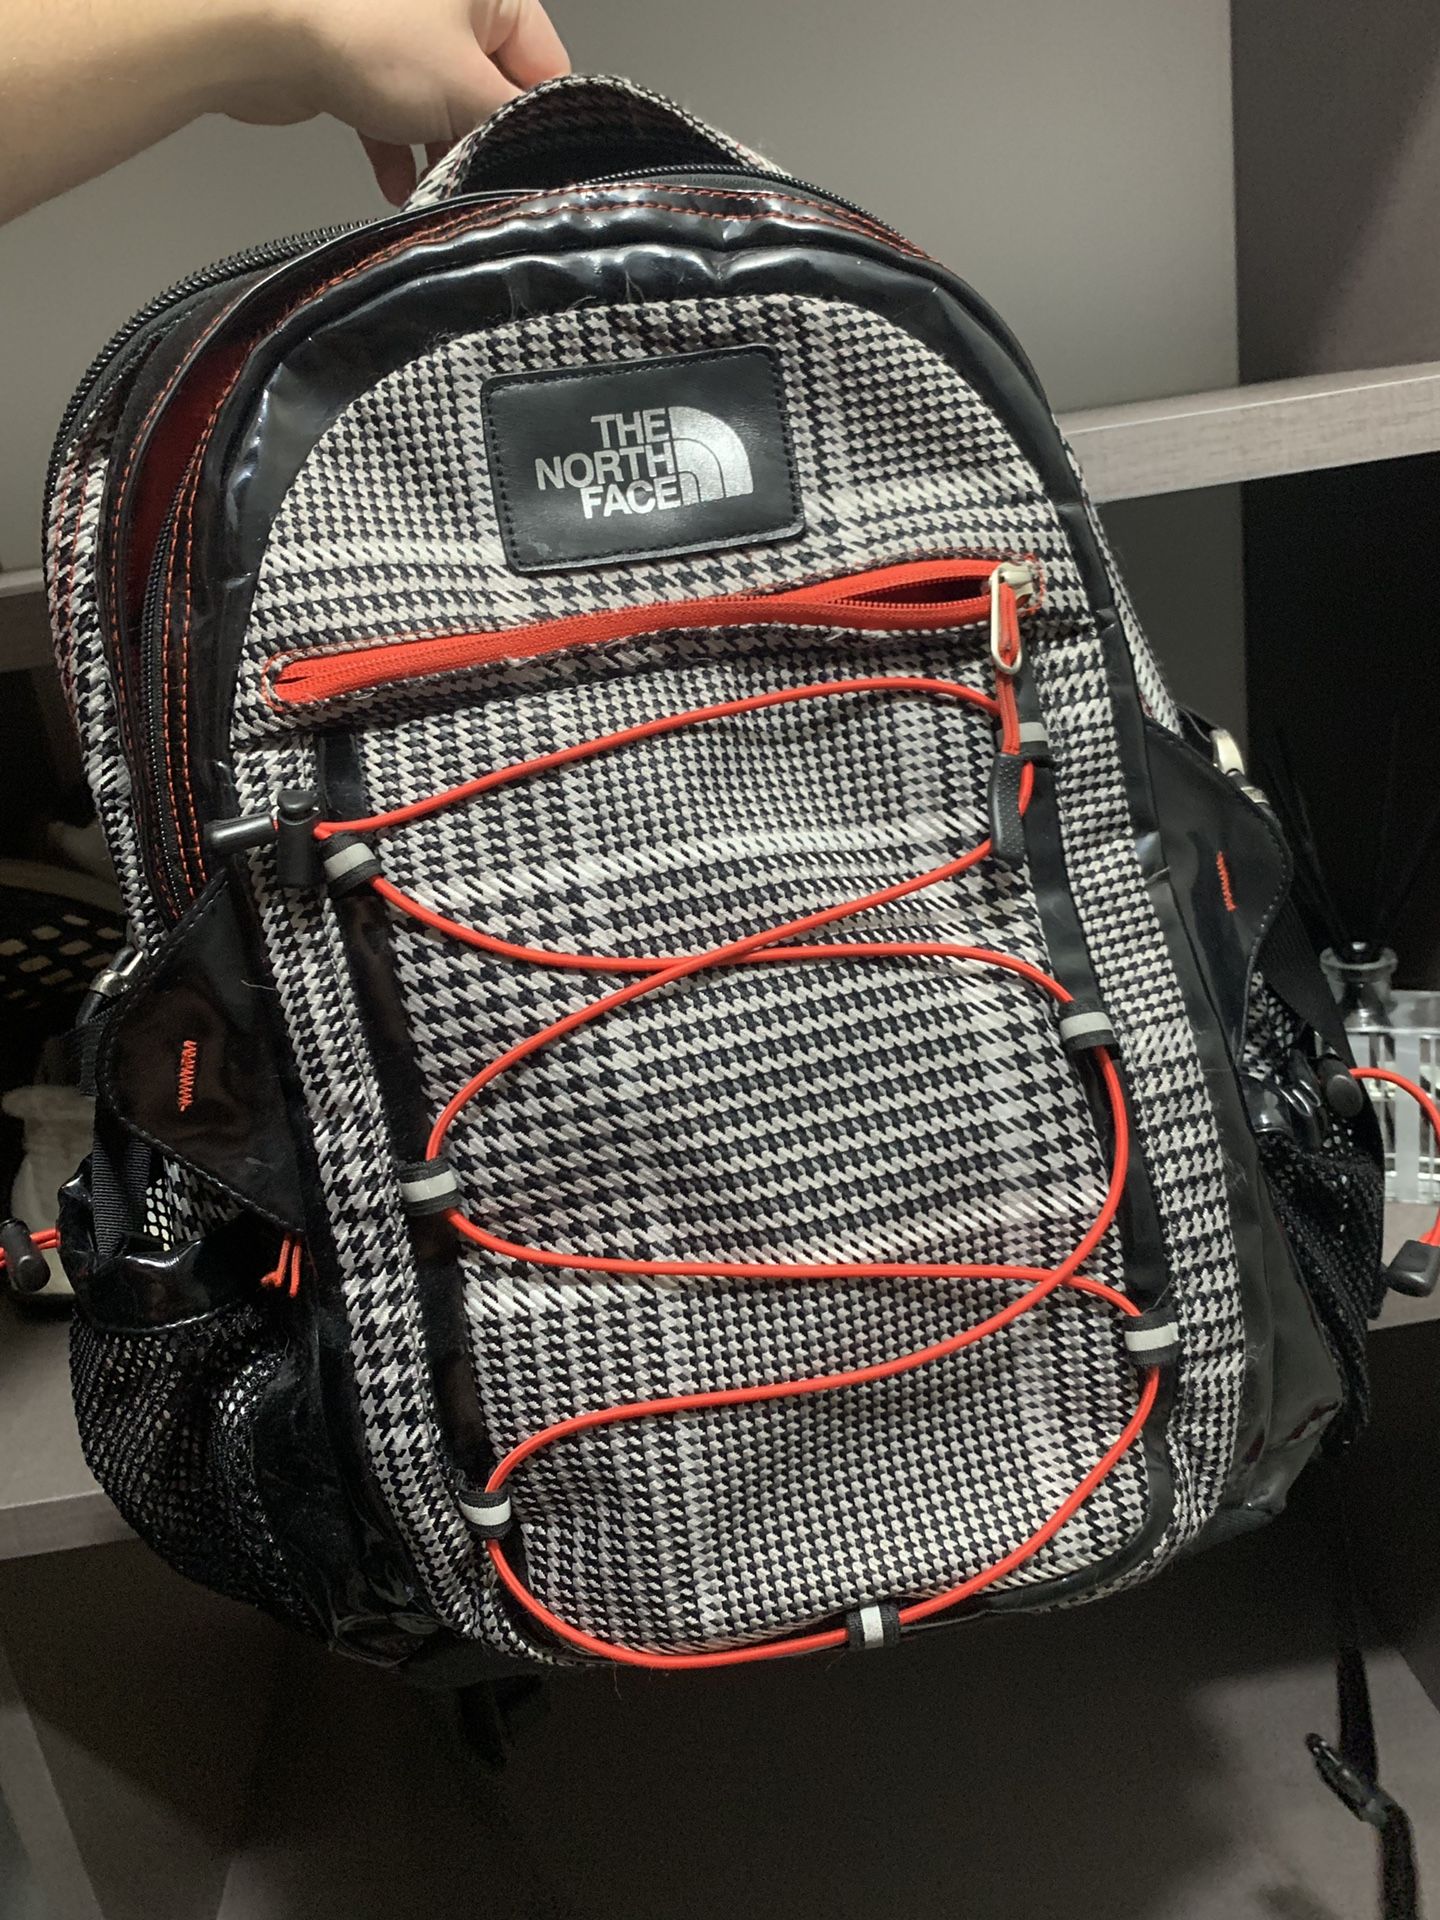 The North Face Borealis SE Backpack - Shiny Houndstooth